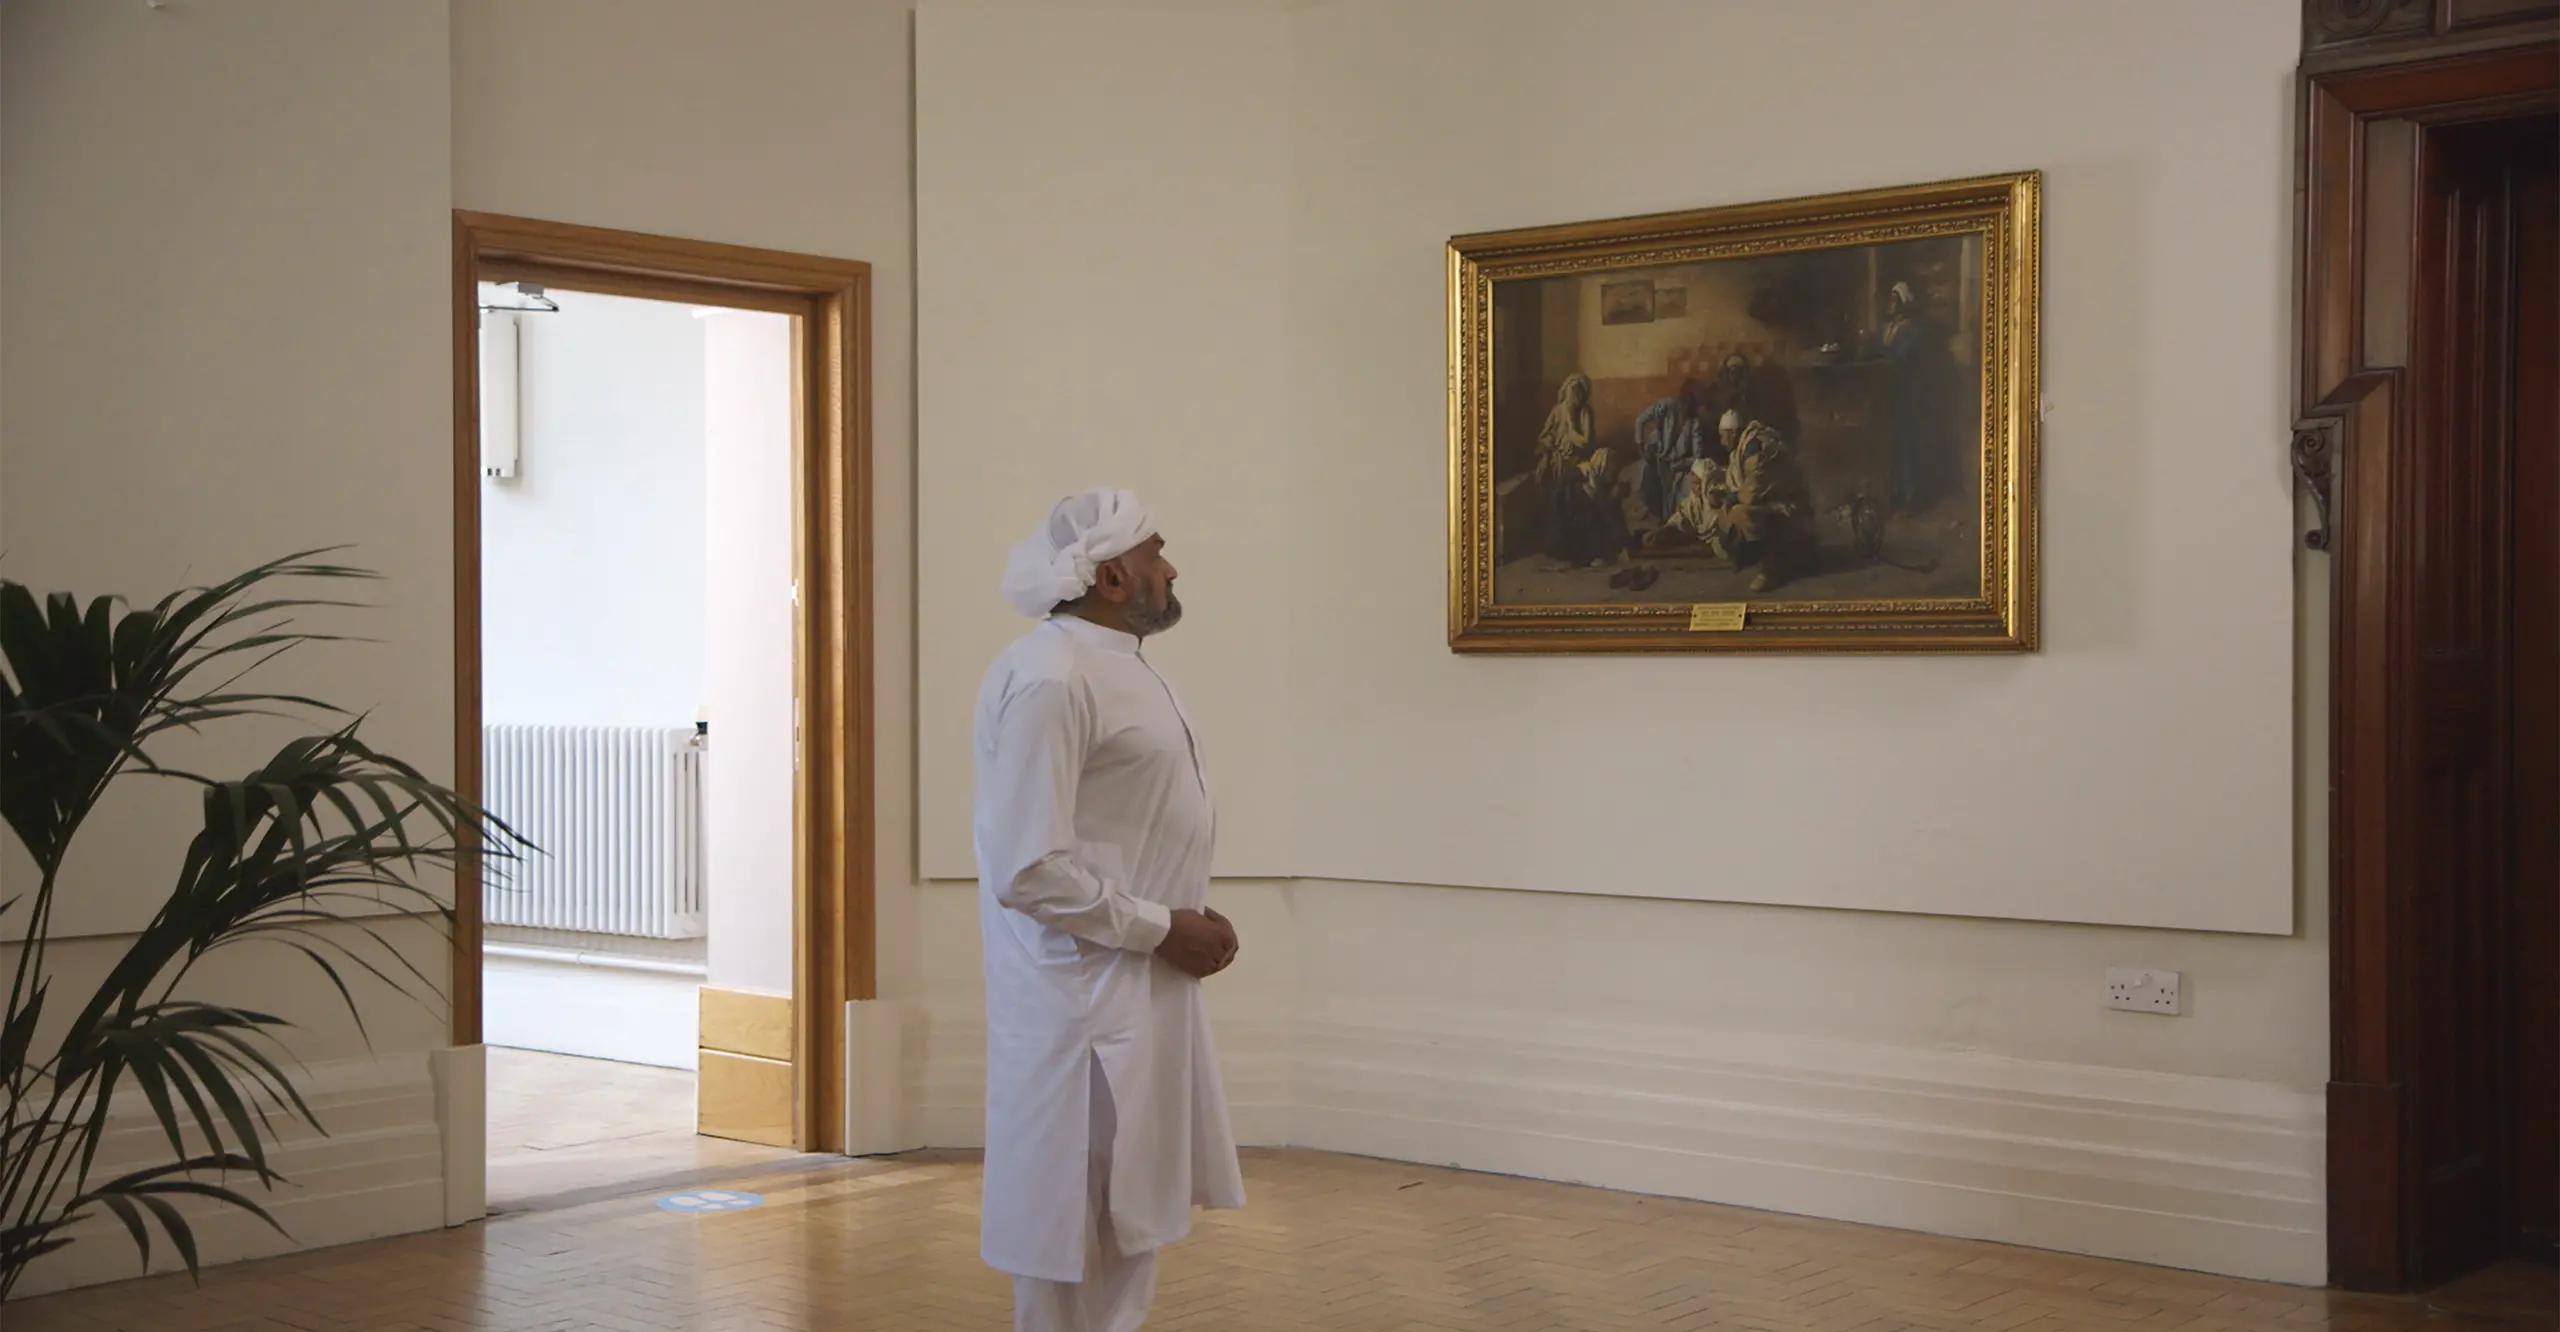 A man dressed in a white shalwar kameez and head covering stands in front of a painting in a gallery.